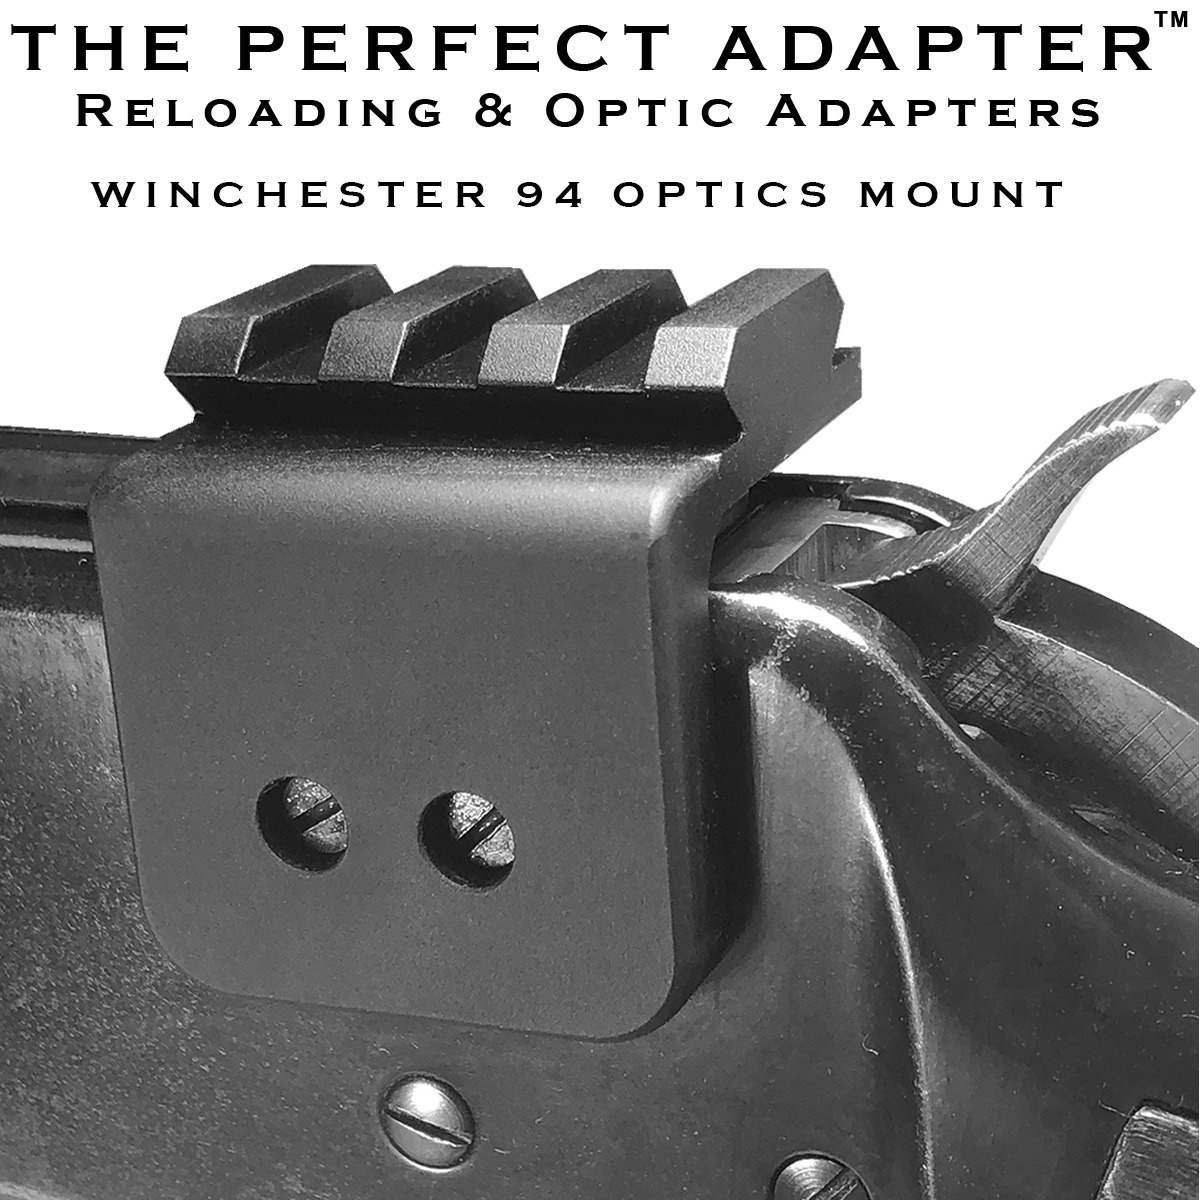 WINCHESTER 94 & 92 Mount Red Dot Scope Top eject model lever actions- Gun-Guides